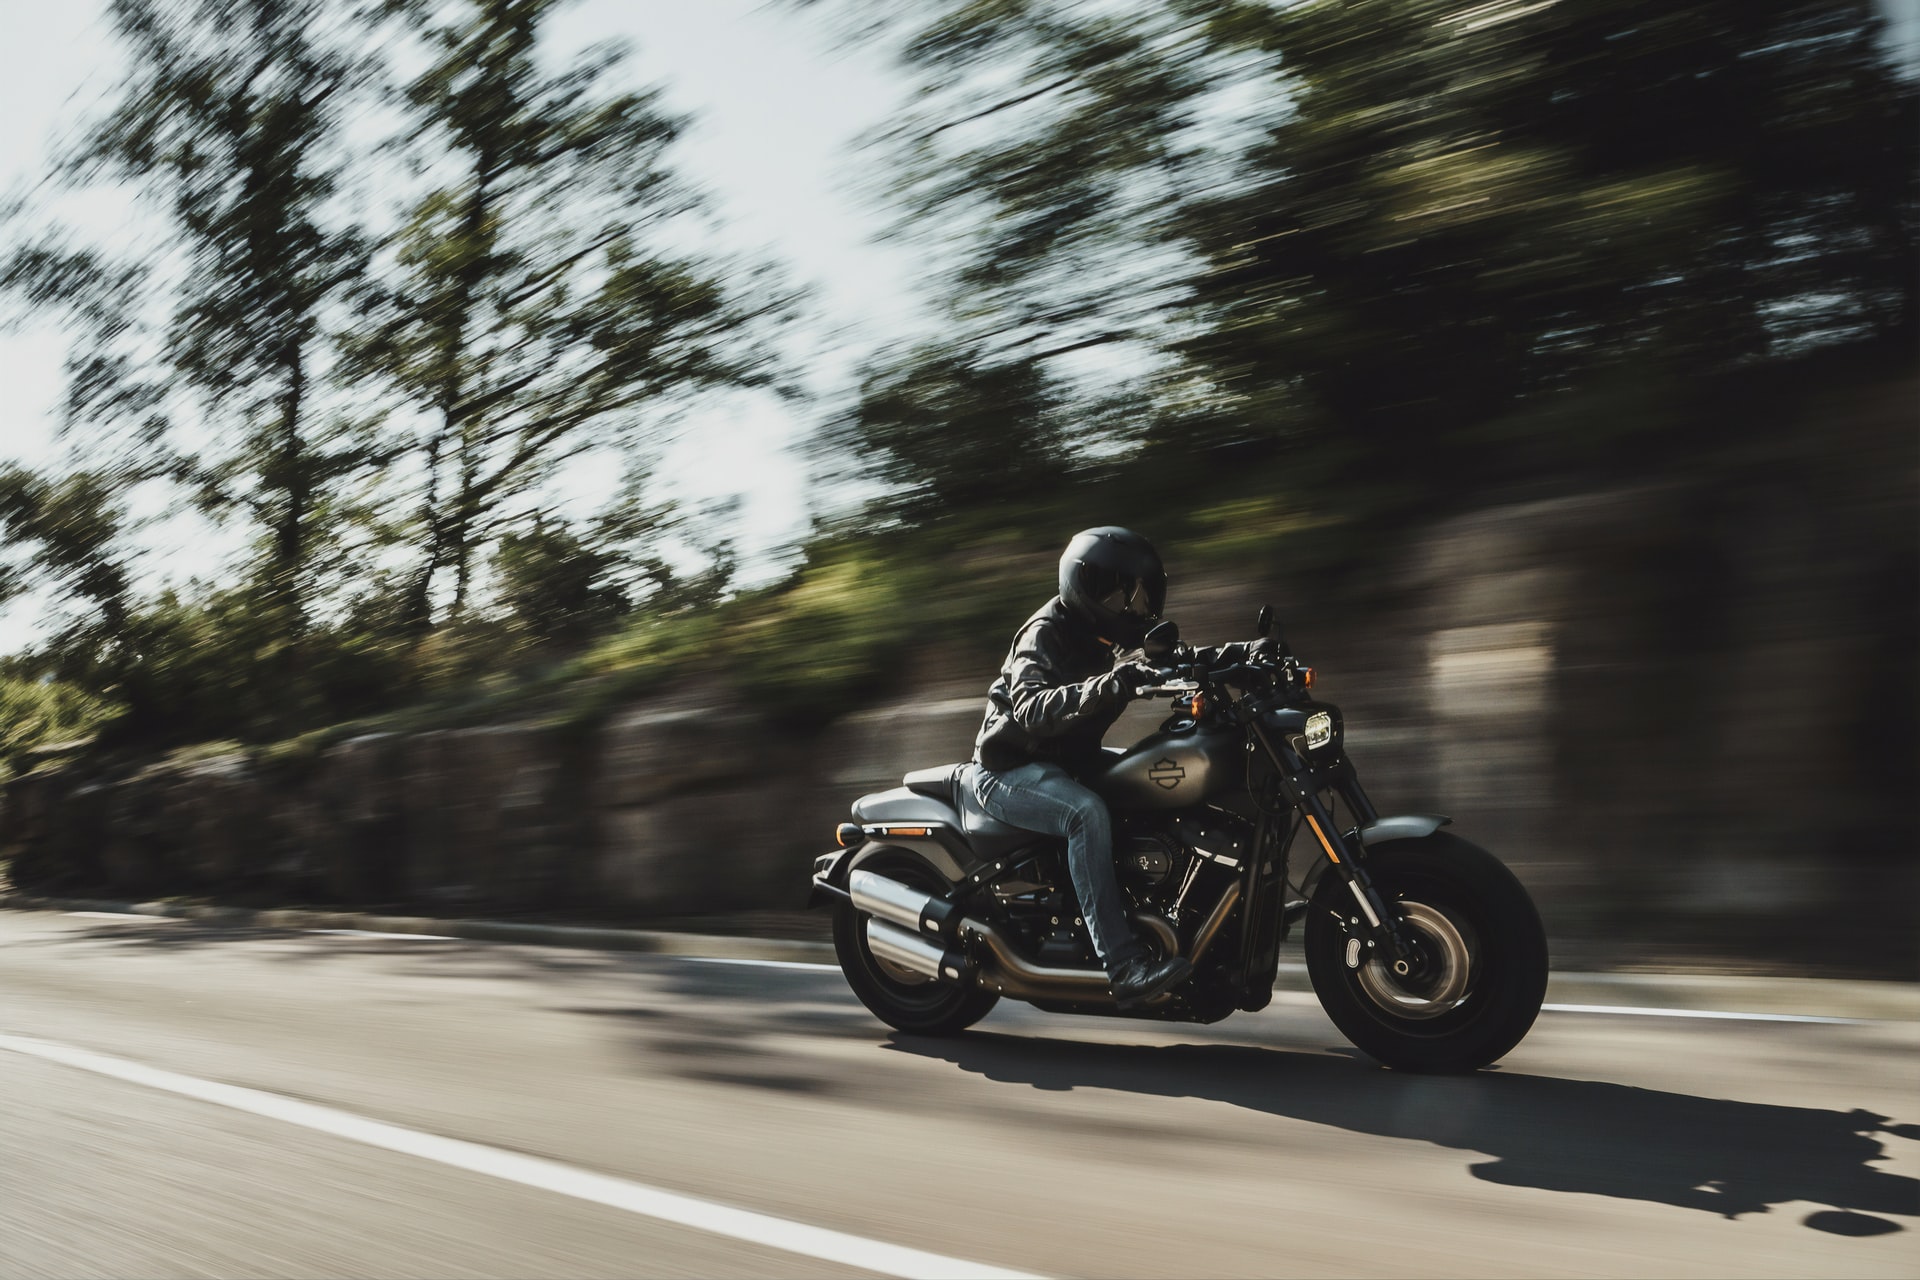 Why Should You Hire an Attorney After Meeting with A Motorcycle Accident?